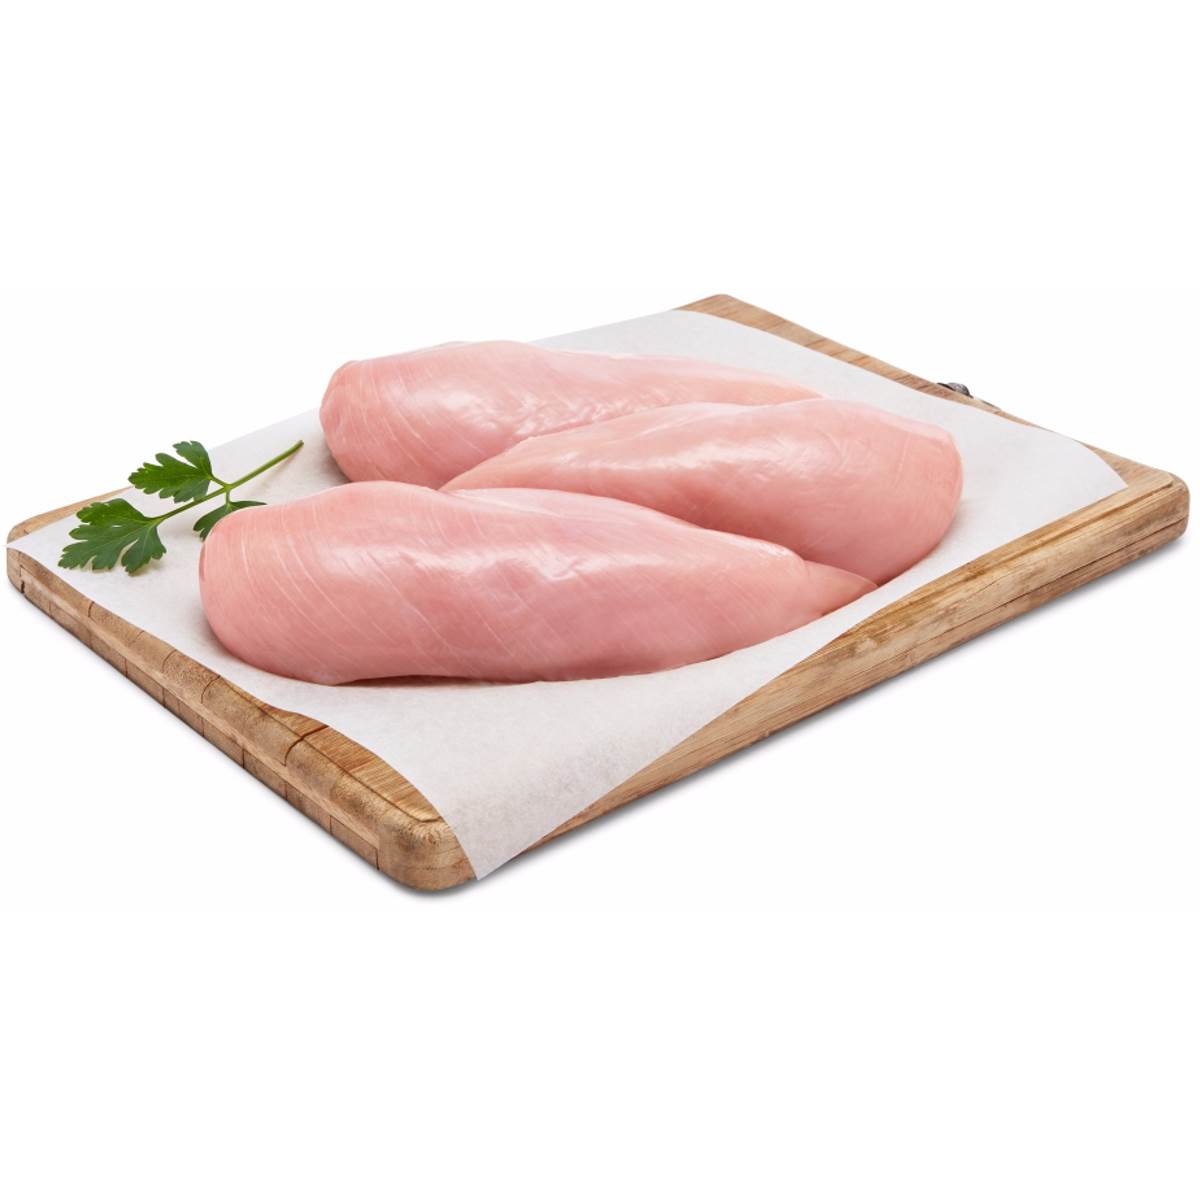 Calories in Woolworths Rspca Approved Chicken Breast Fillet